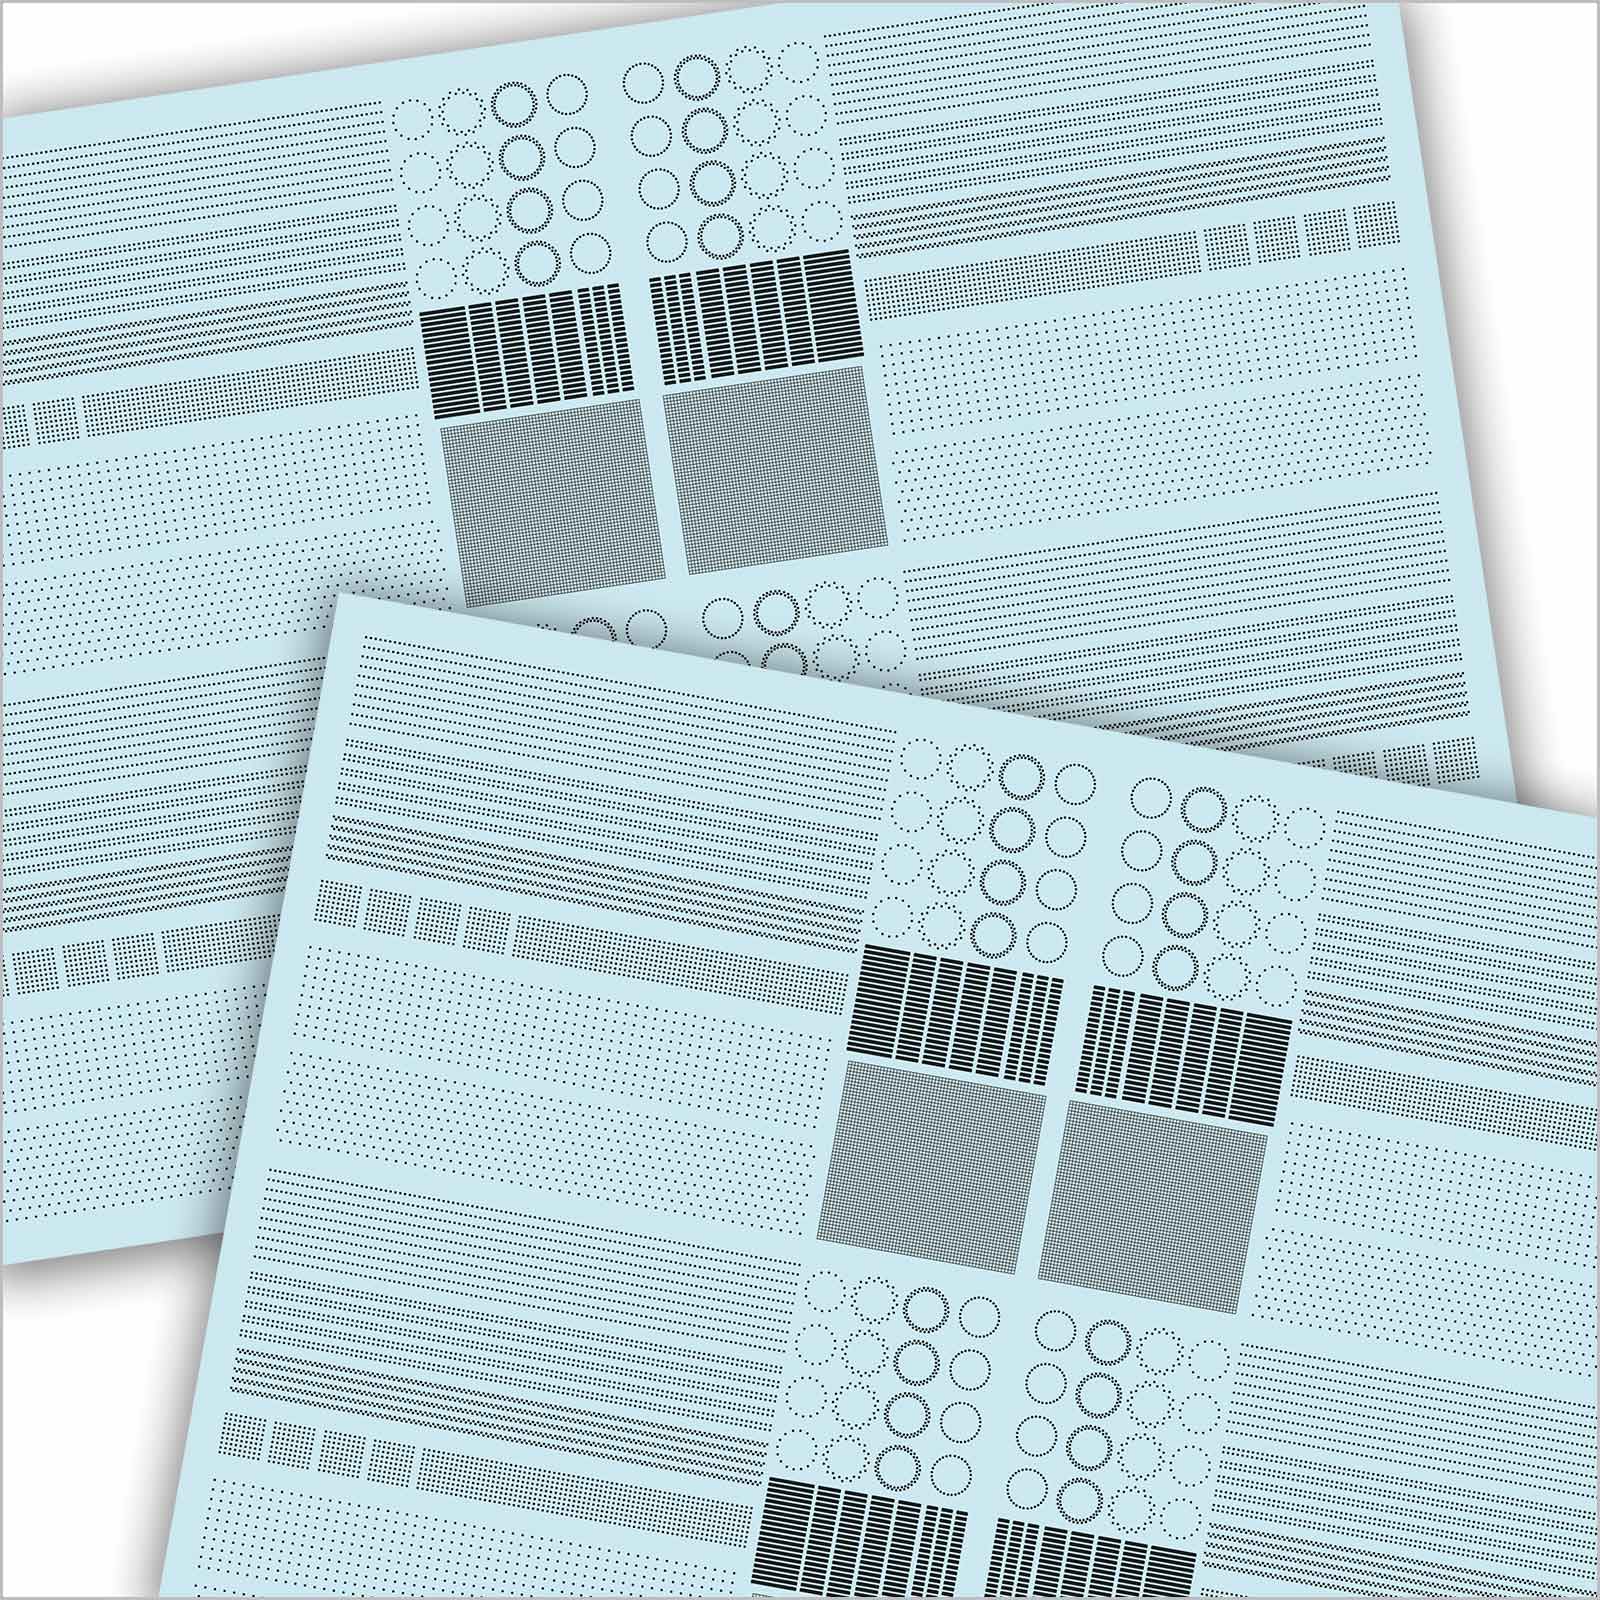 HO scale decals with raised 3D rivets and other surface details - Micro - Mark Decaling